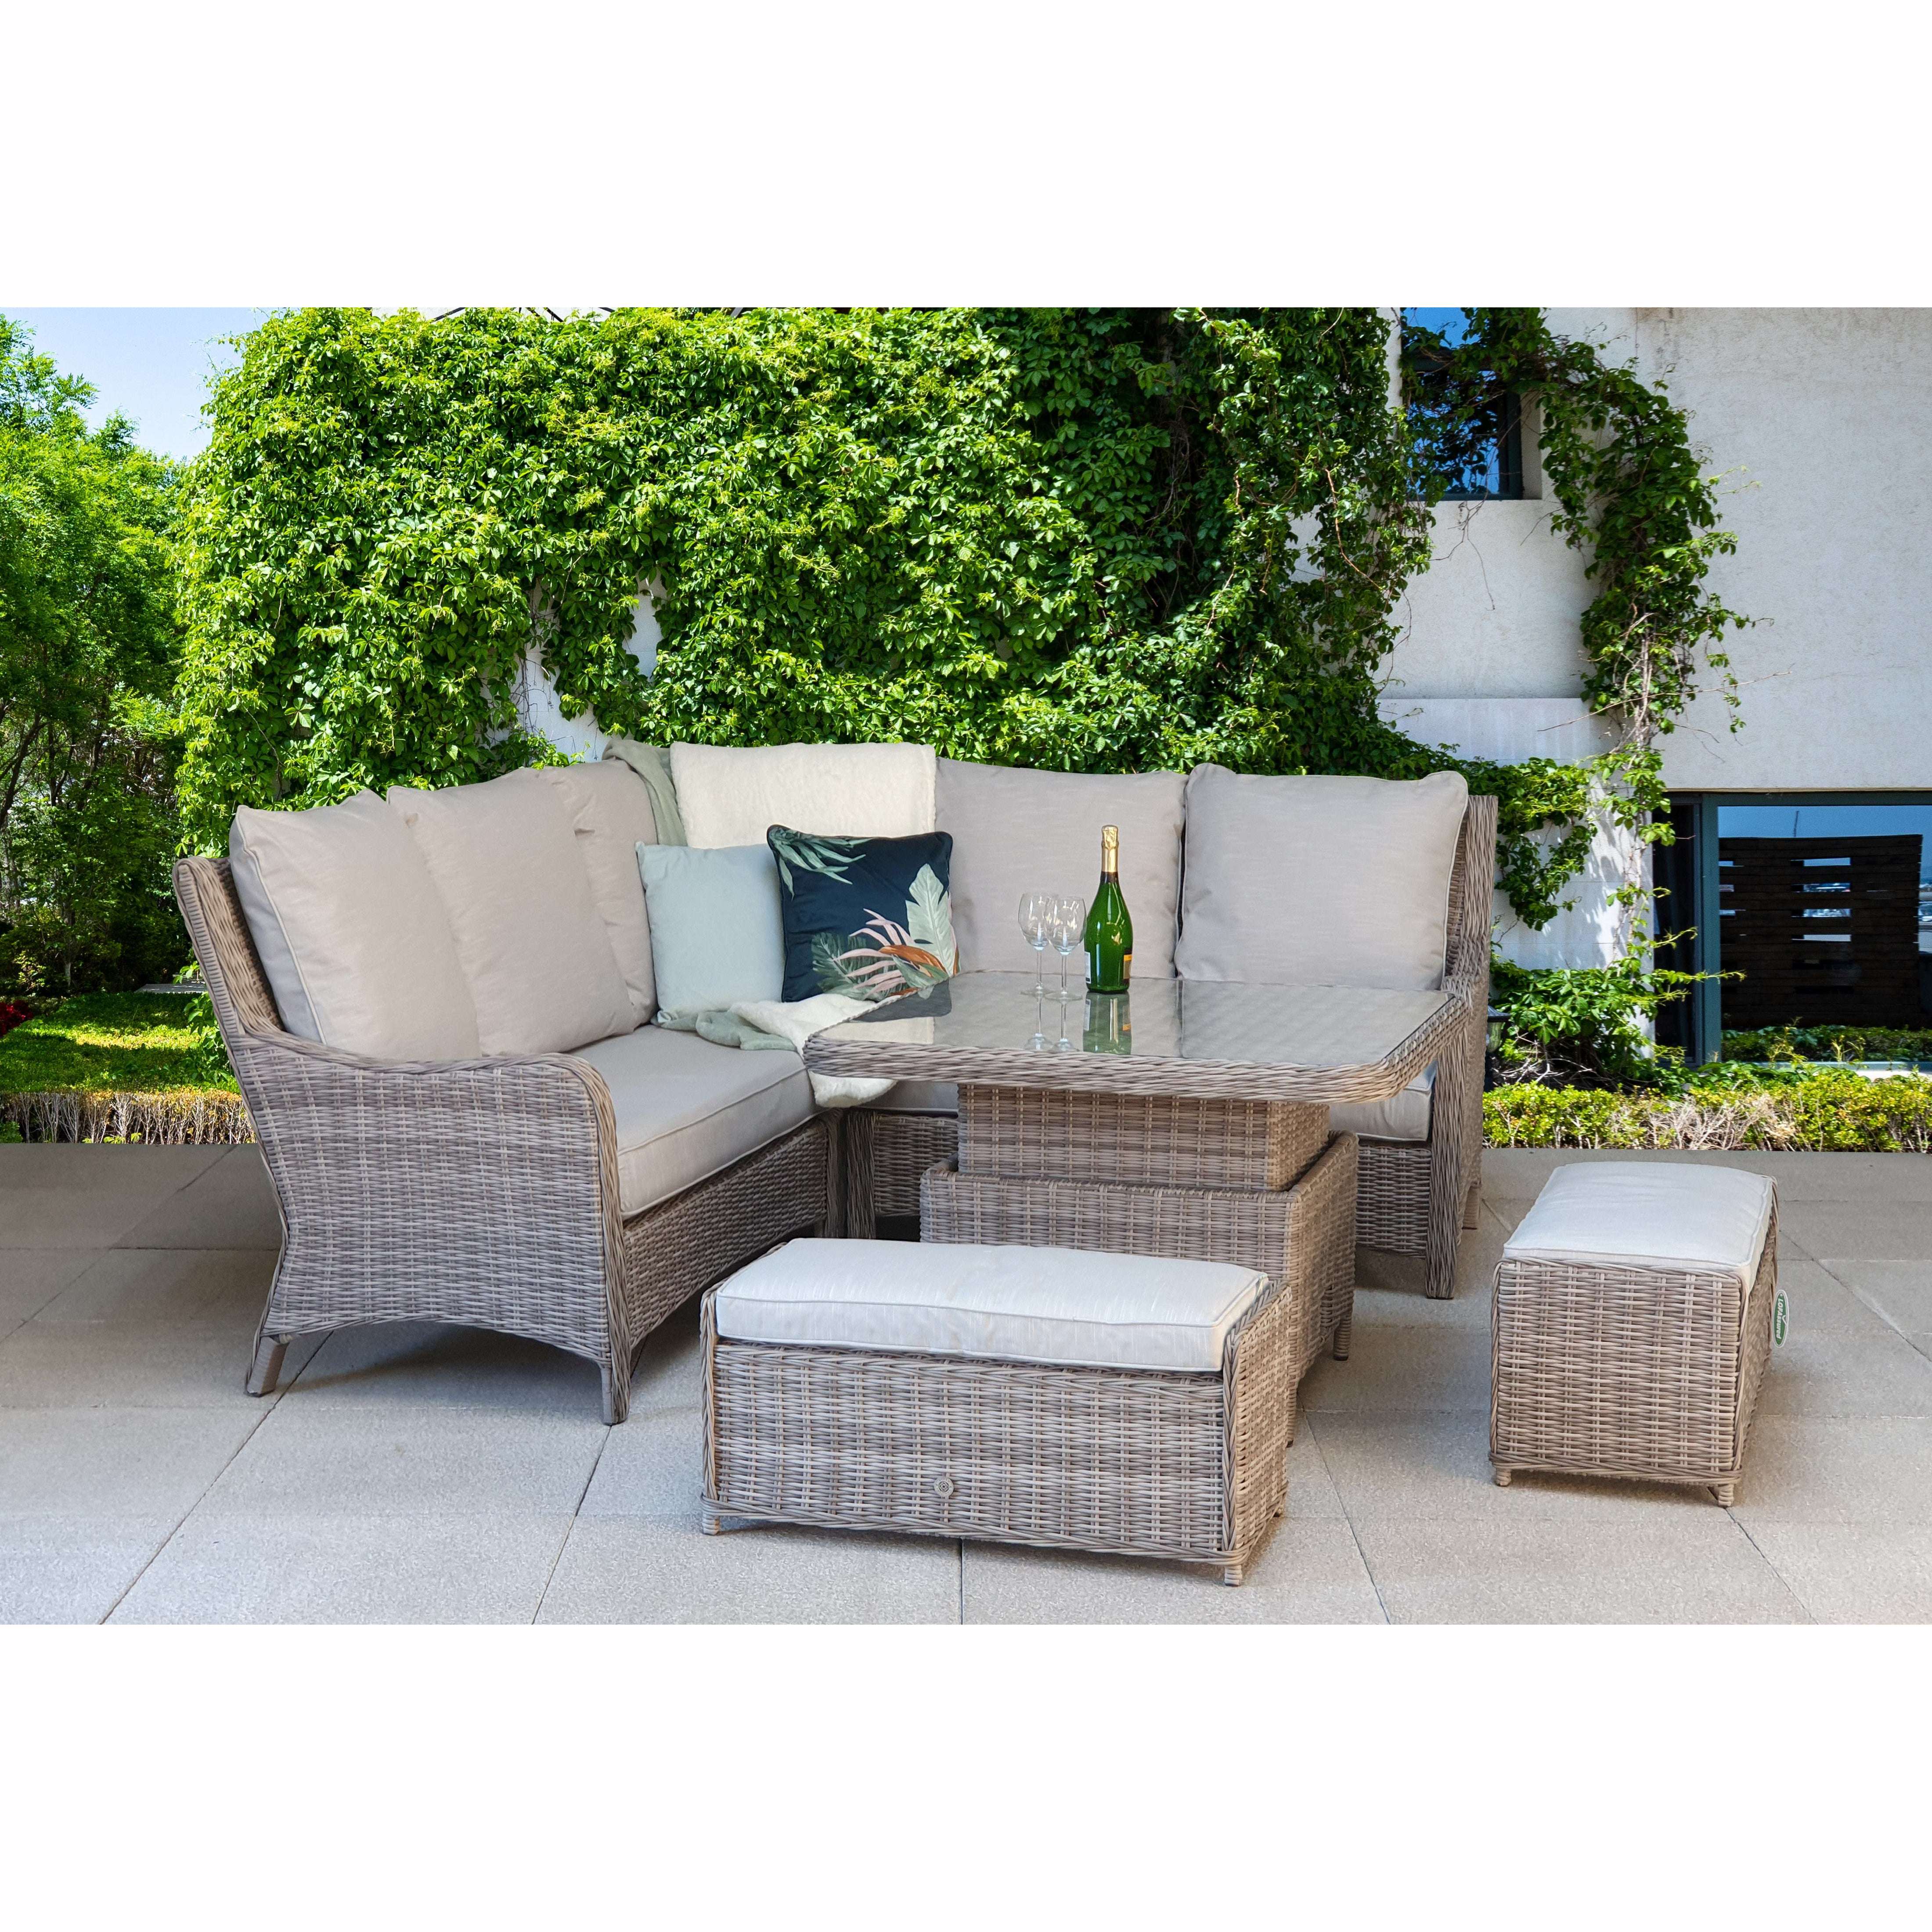 Exceptional Garden:Signature Weave Alexandra Corner Dining Set with Lifting Table